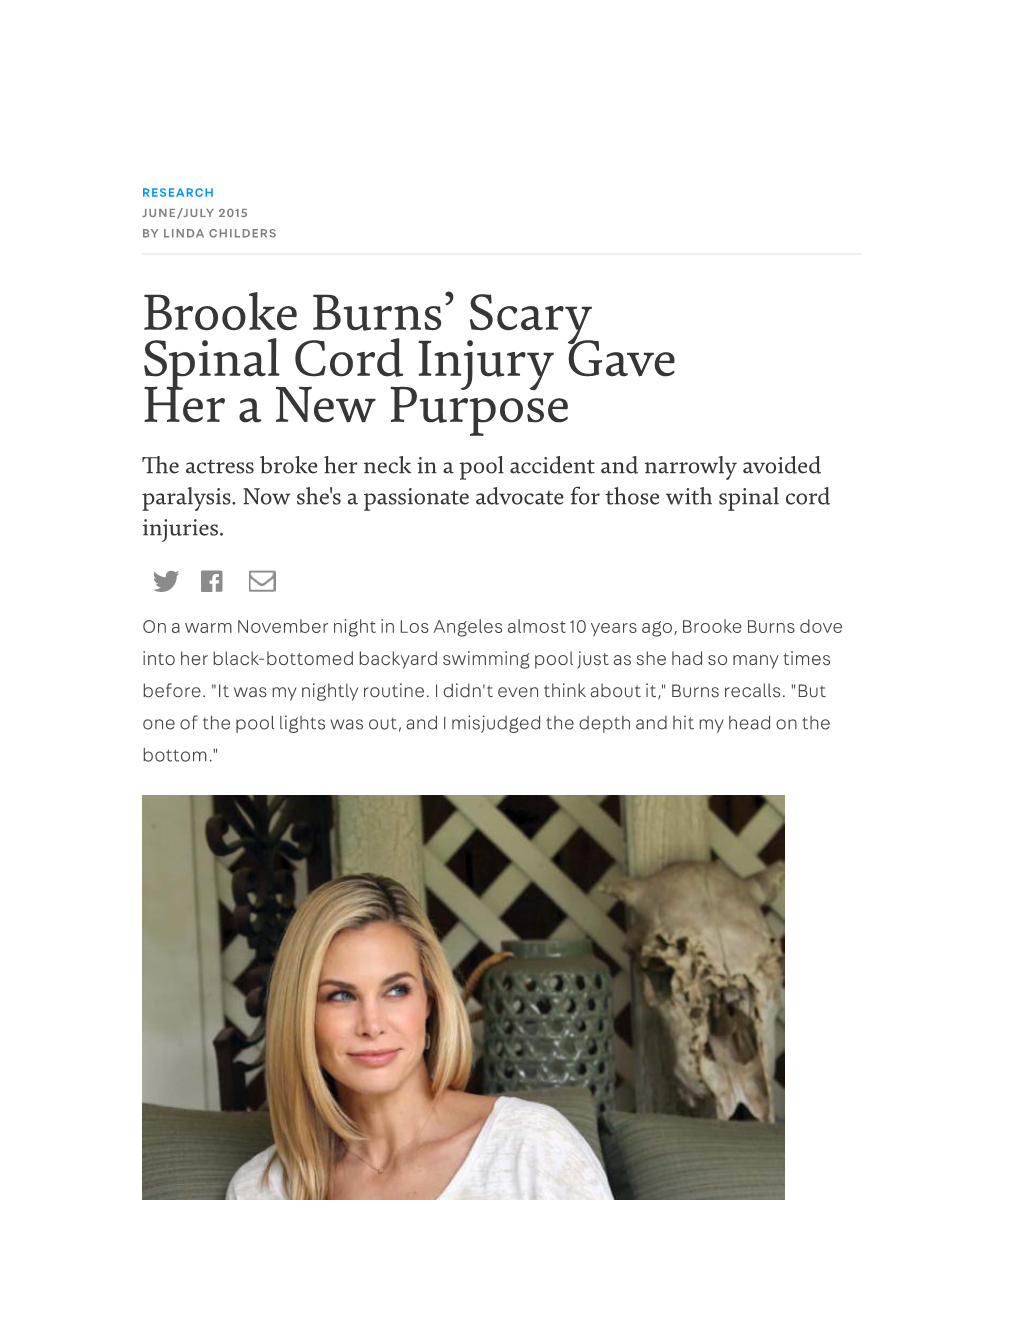 Brooke Burns' Scary Spinal Cord Injury Gave Her a New Purpose